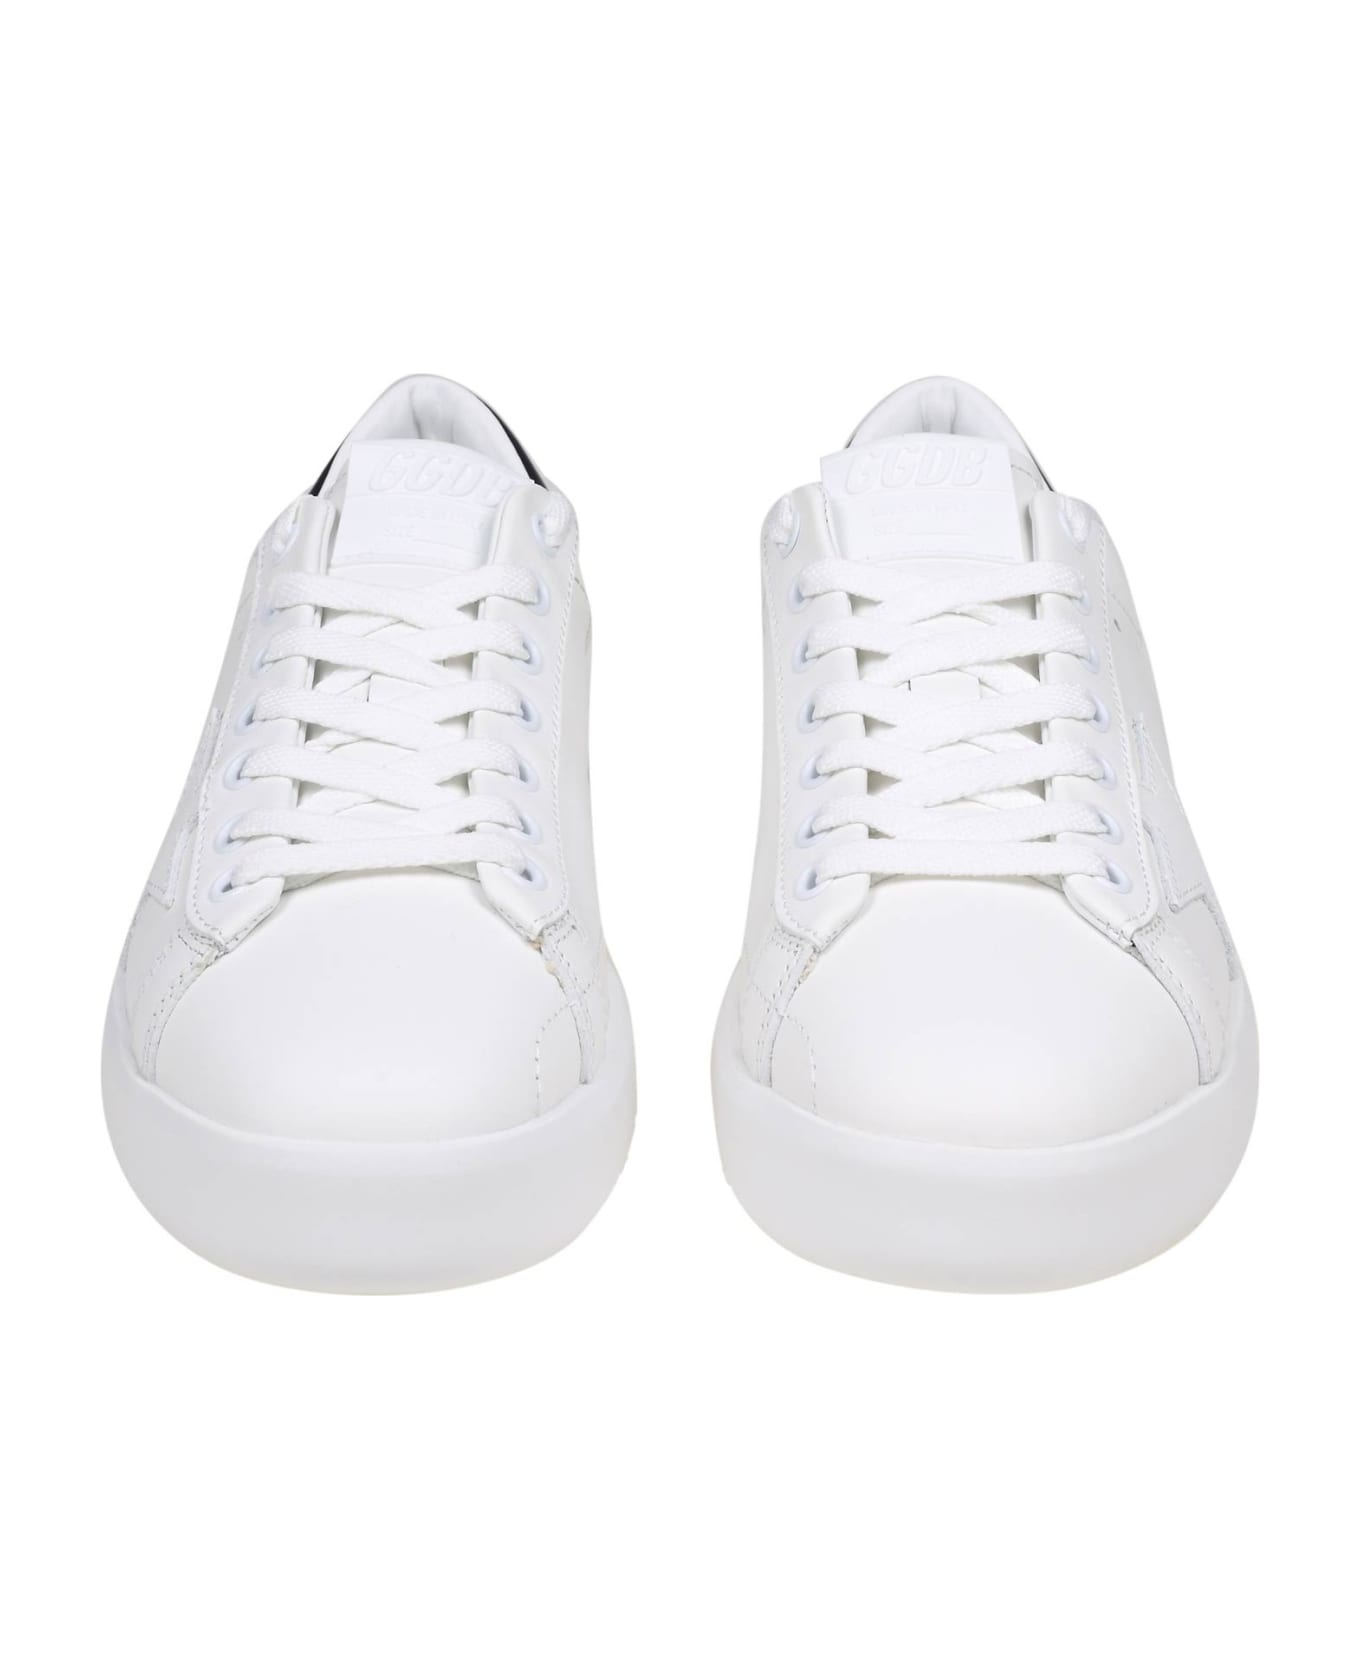 Golden Goose Pure Star Sneakers - White/blue